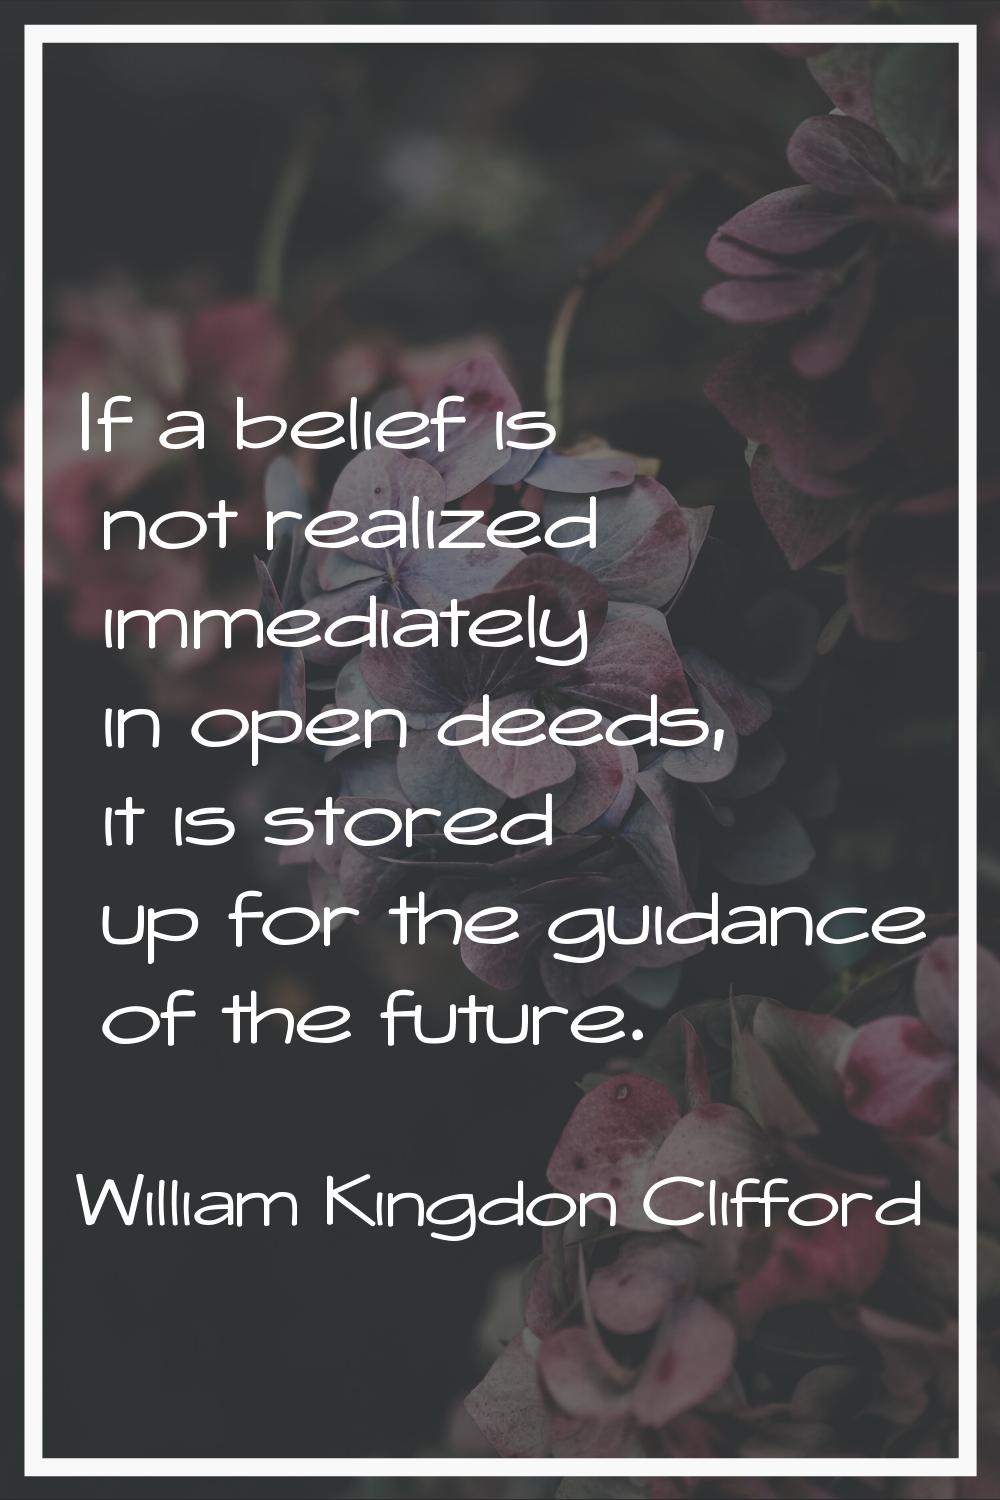 If a belief is not realized immediately in open deeds, it is stored up for the guidance of the futu